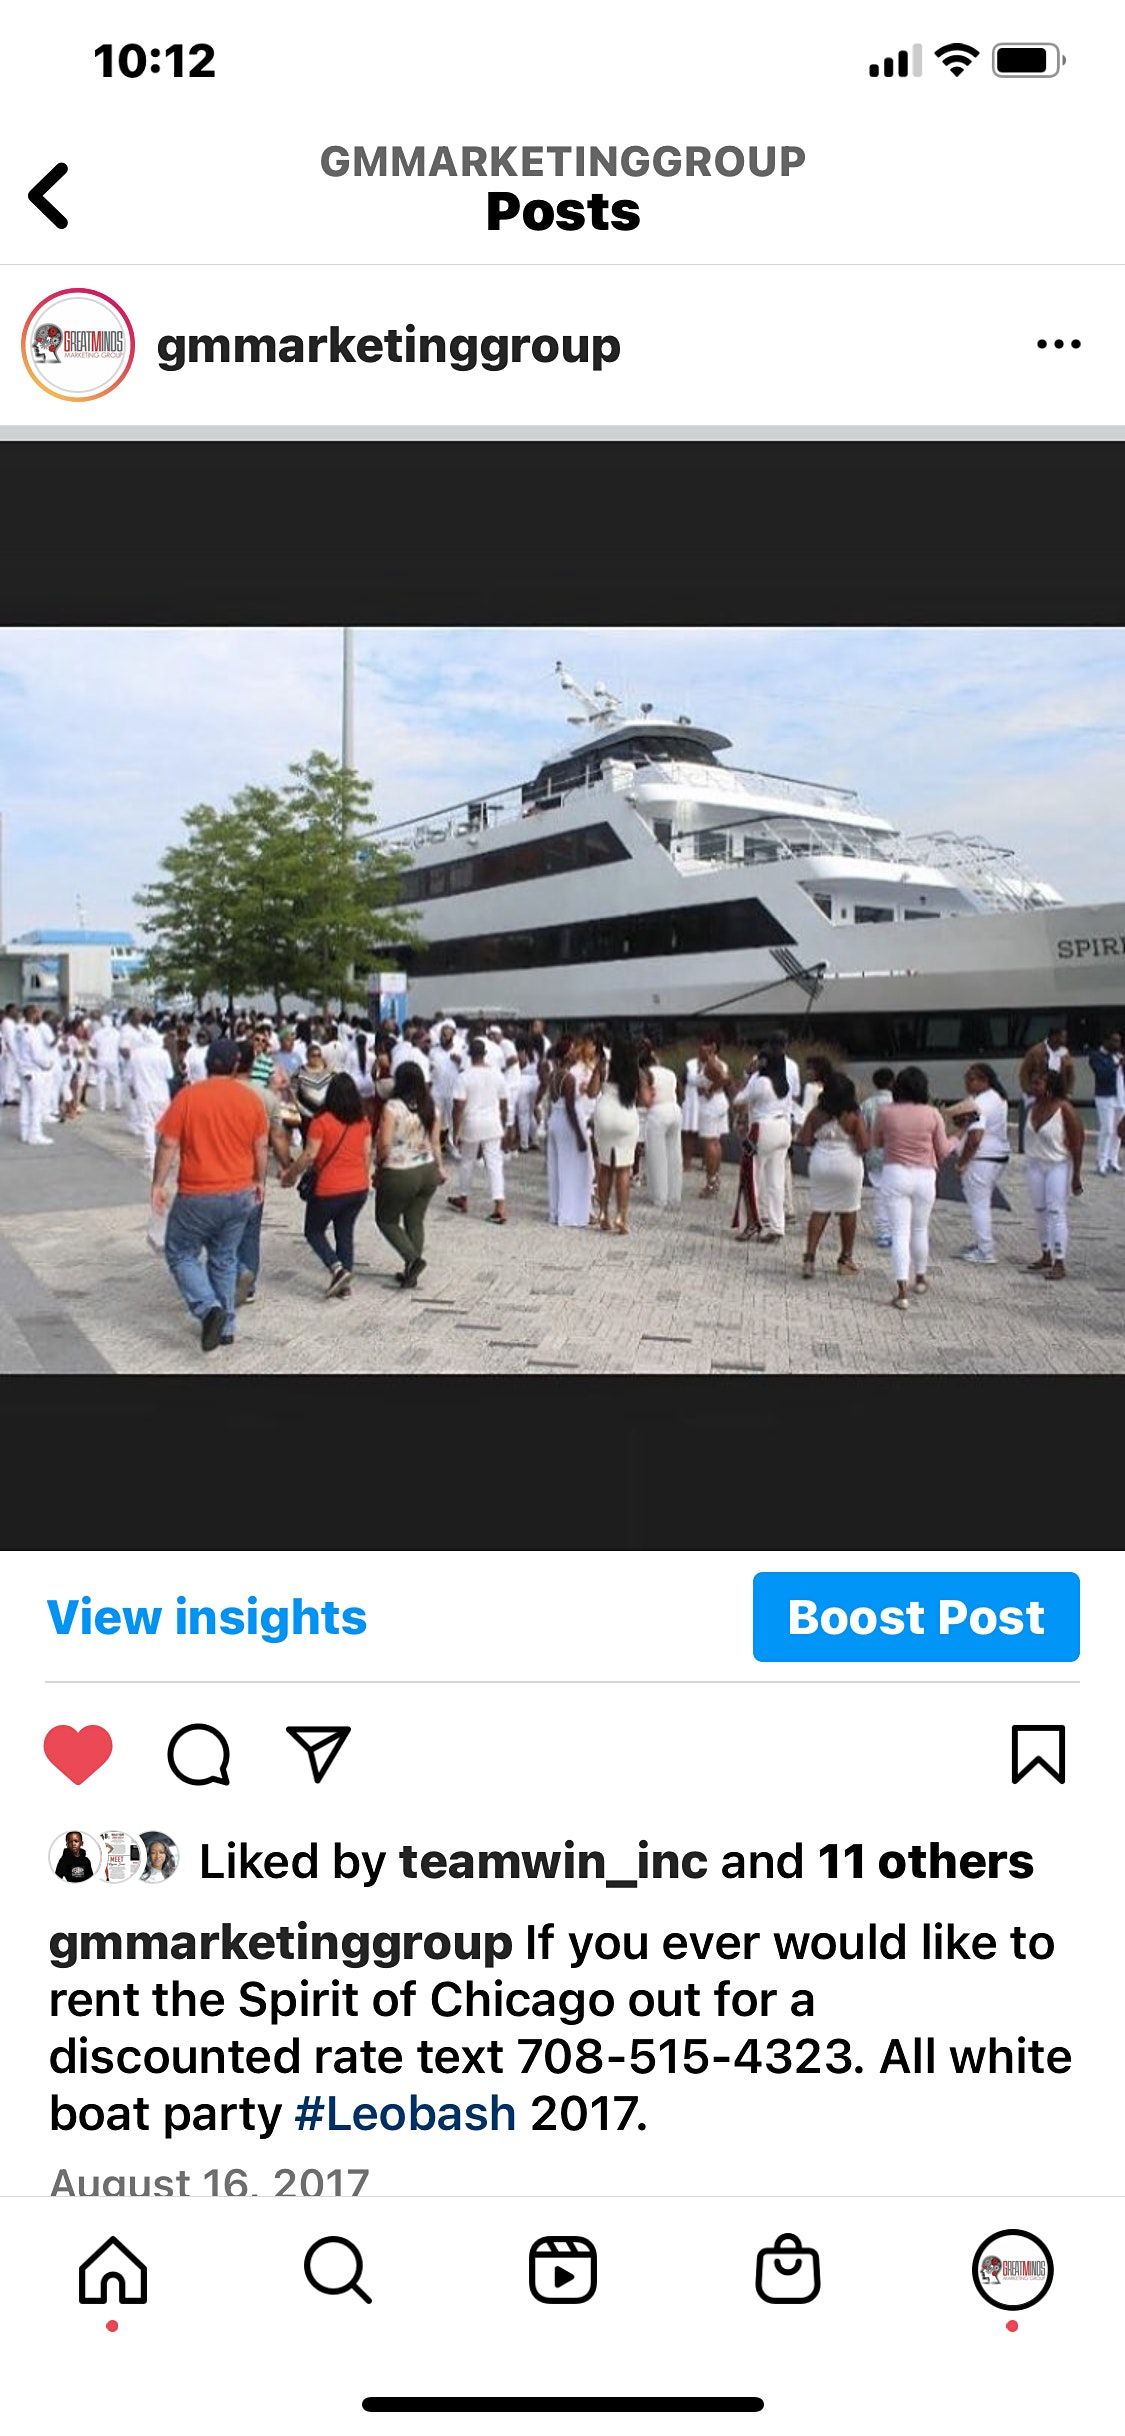 All White Boat Party ( Please read before purchasing tickets )